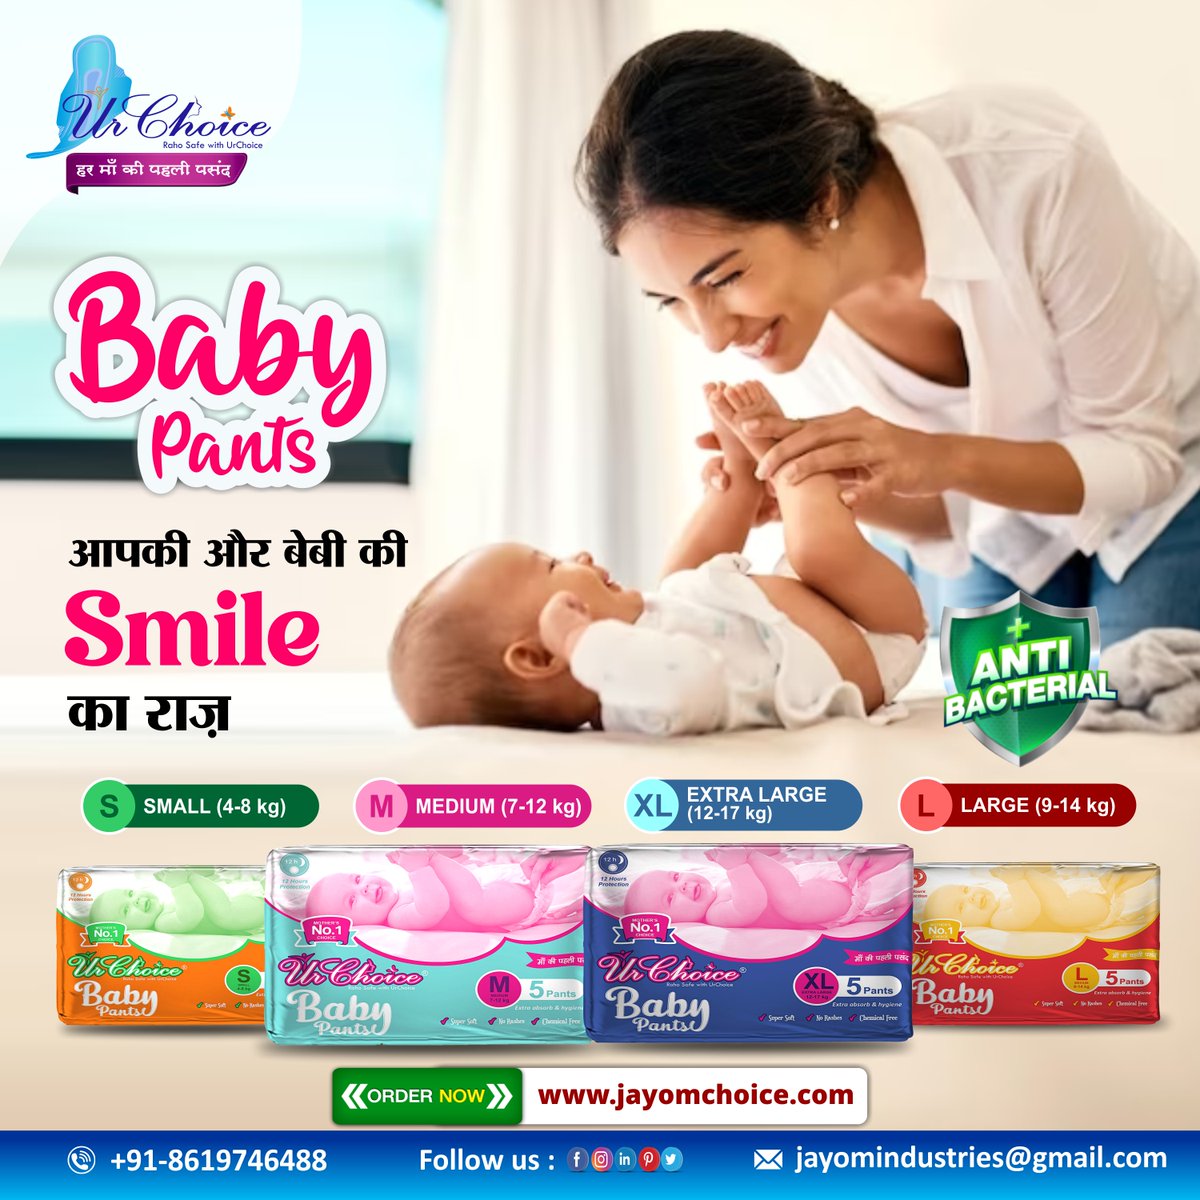 Baby Pants Diaper are super absorbent diaper, made of soft spongy material. Its gel technology converts liquid into gel and its criss-cross design prevents leakages and spills.
#urchoice #babypants #infantsleep #diapers #babydiapers #hygiene #babywipes #babyproducts #babyshop